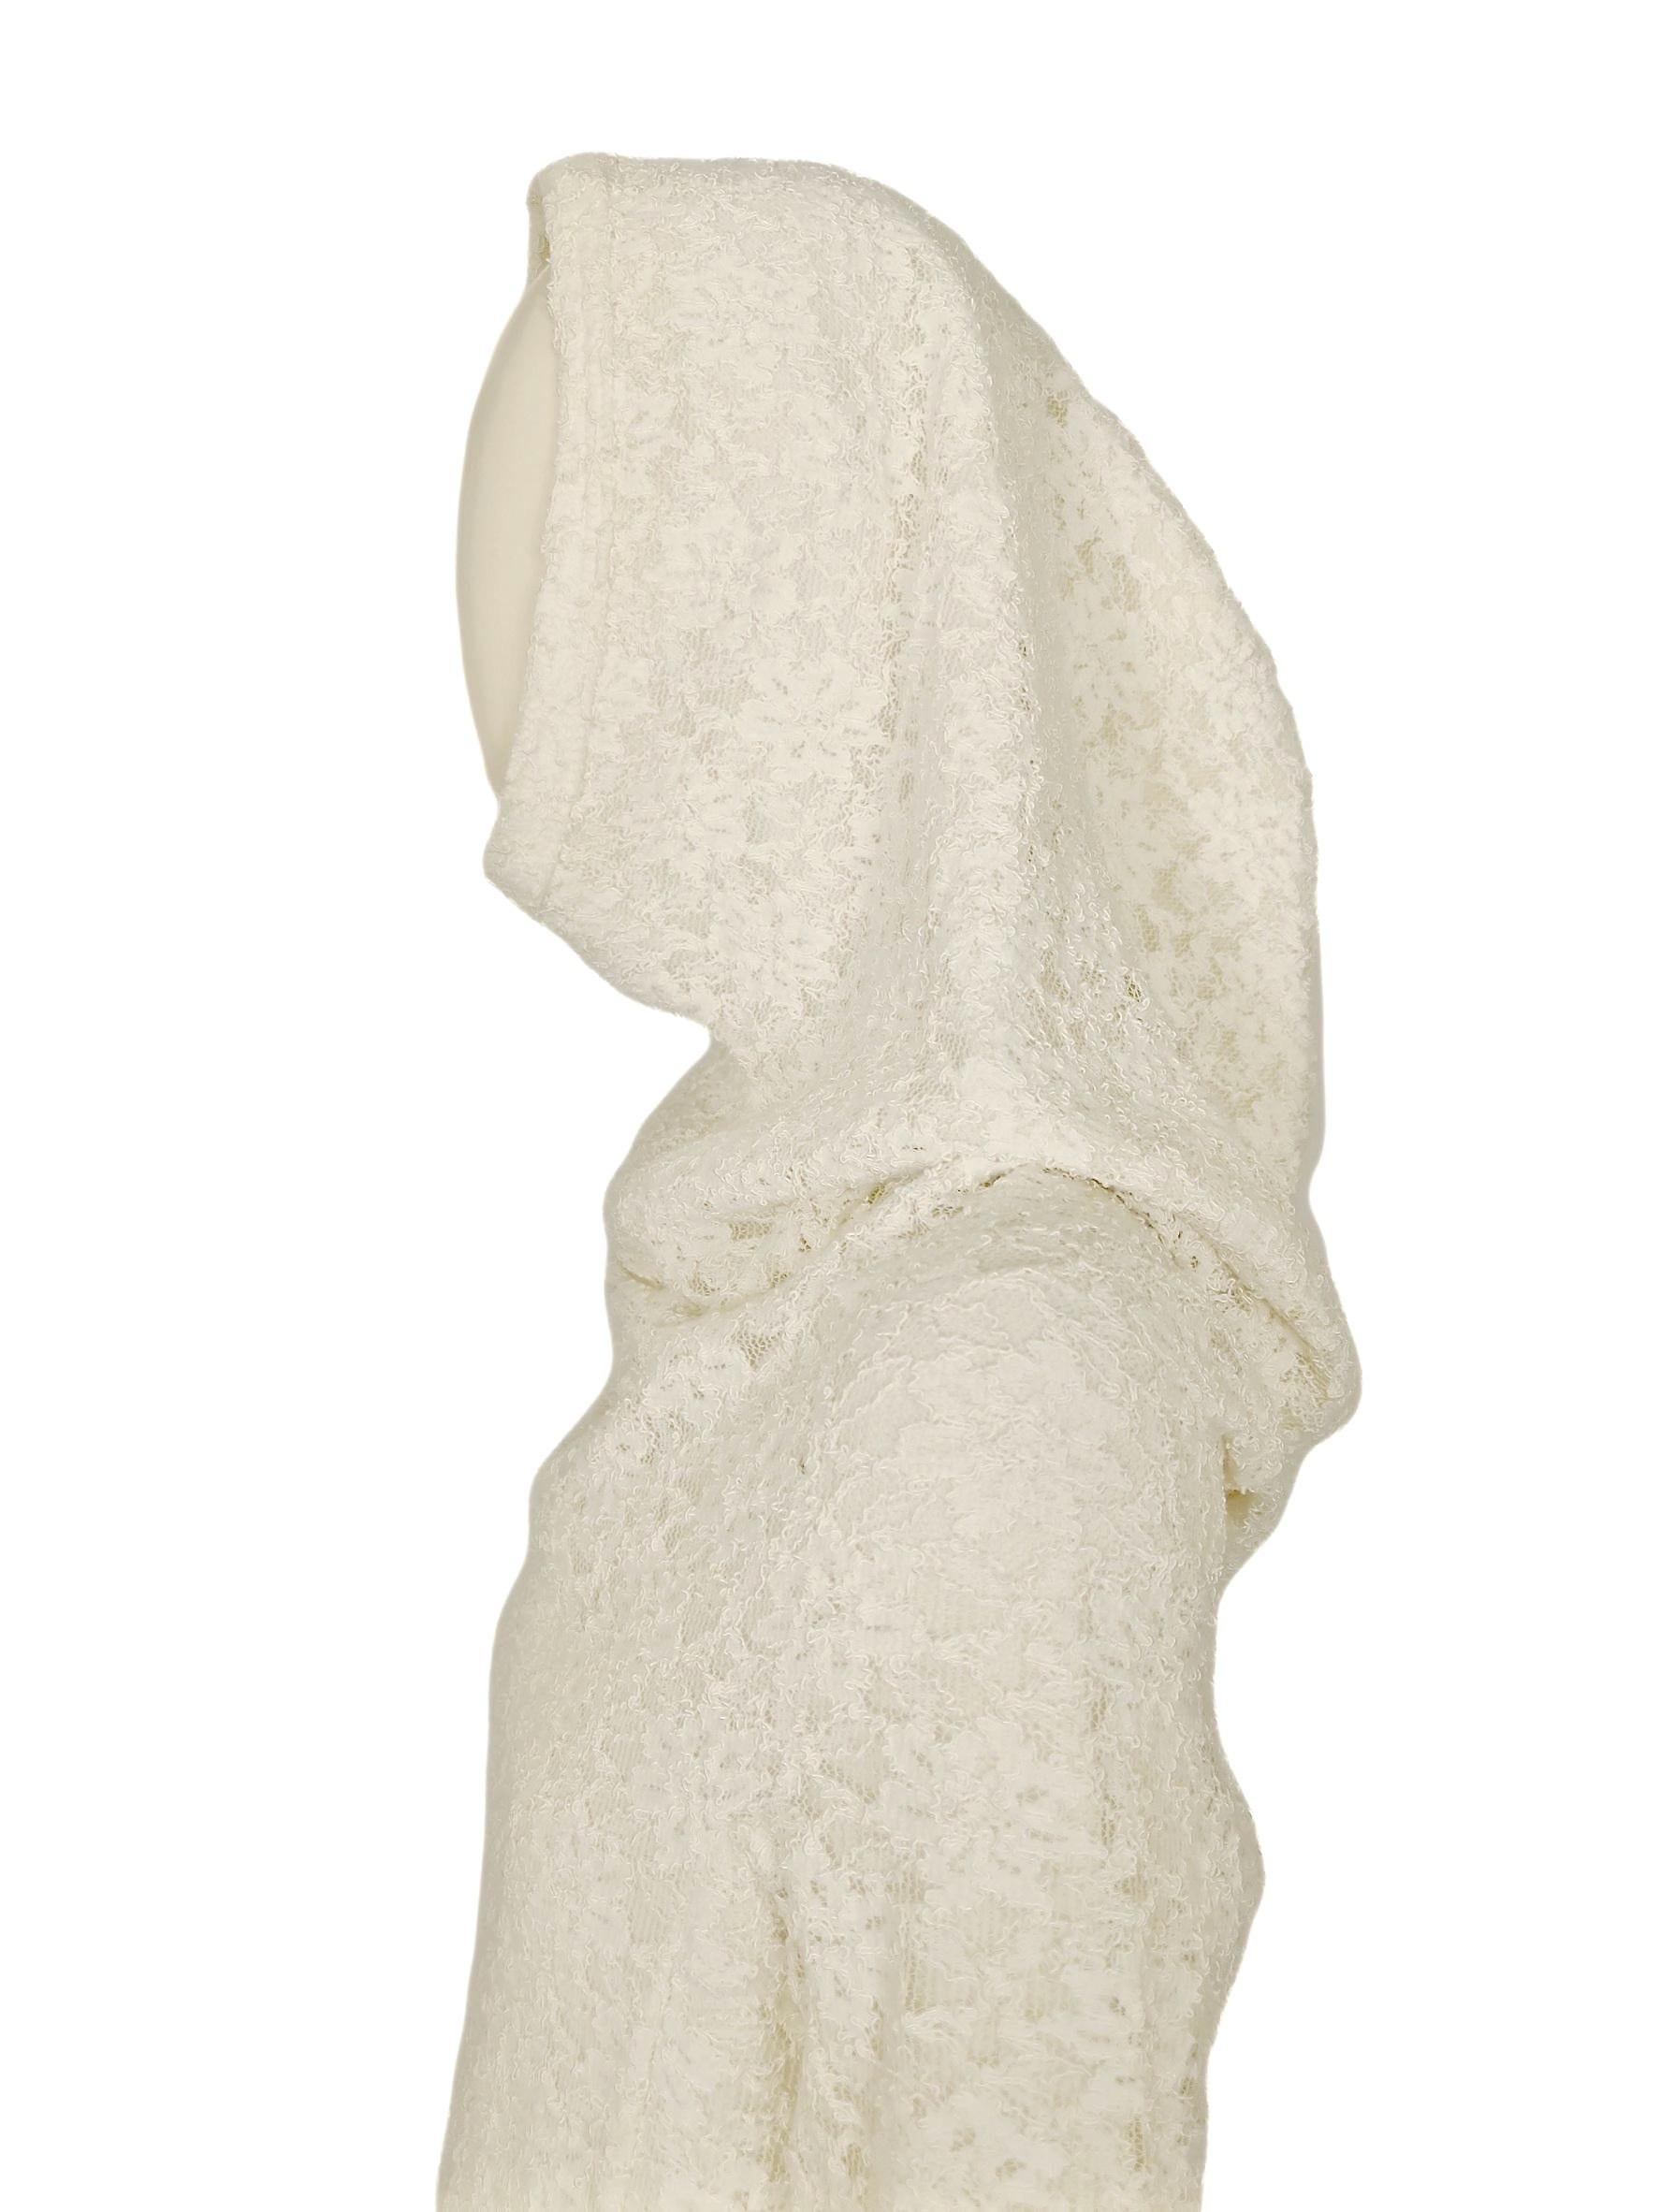 Comme Des Garcons White Drama Cowl Hooded Dress AD 2011 For Sale 4